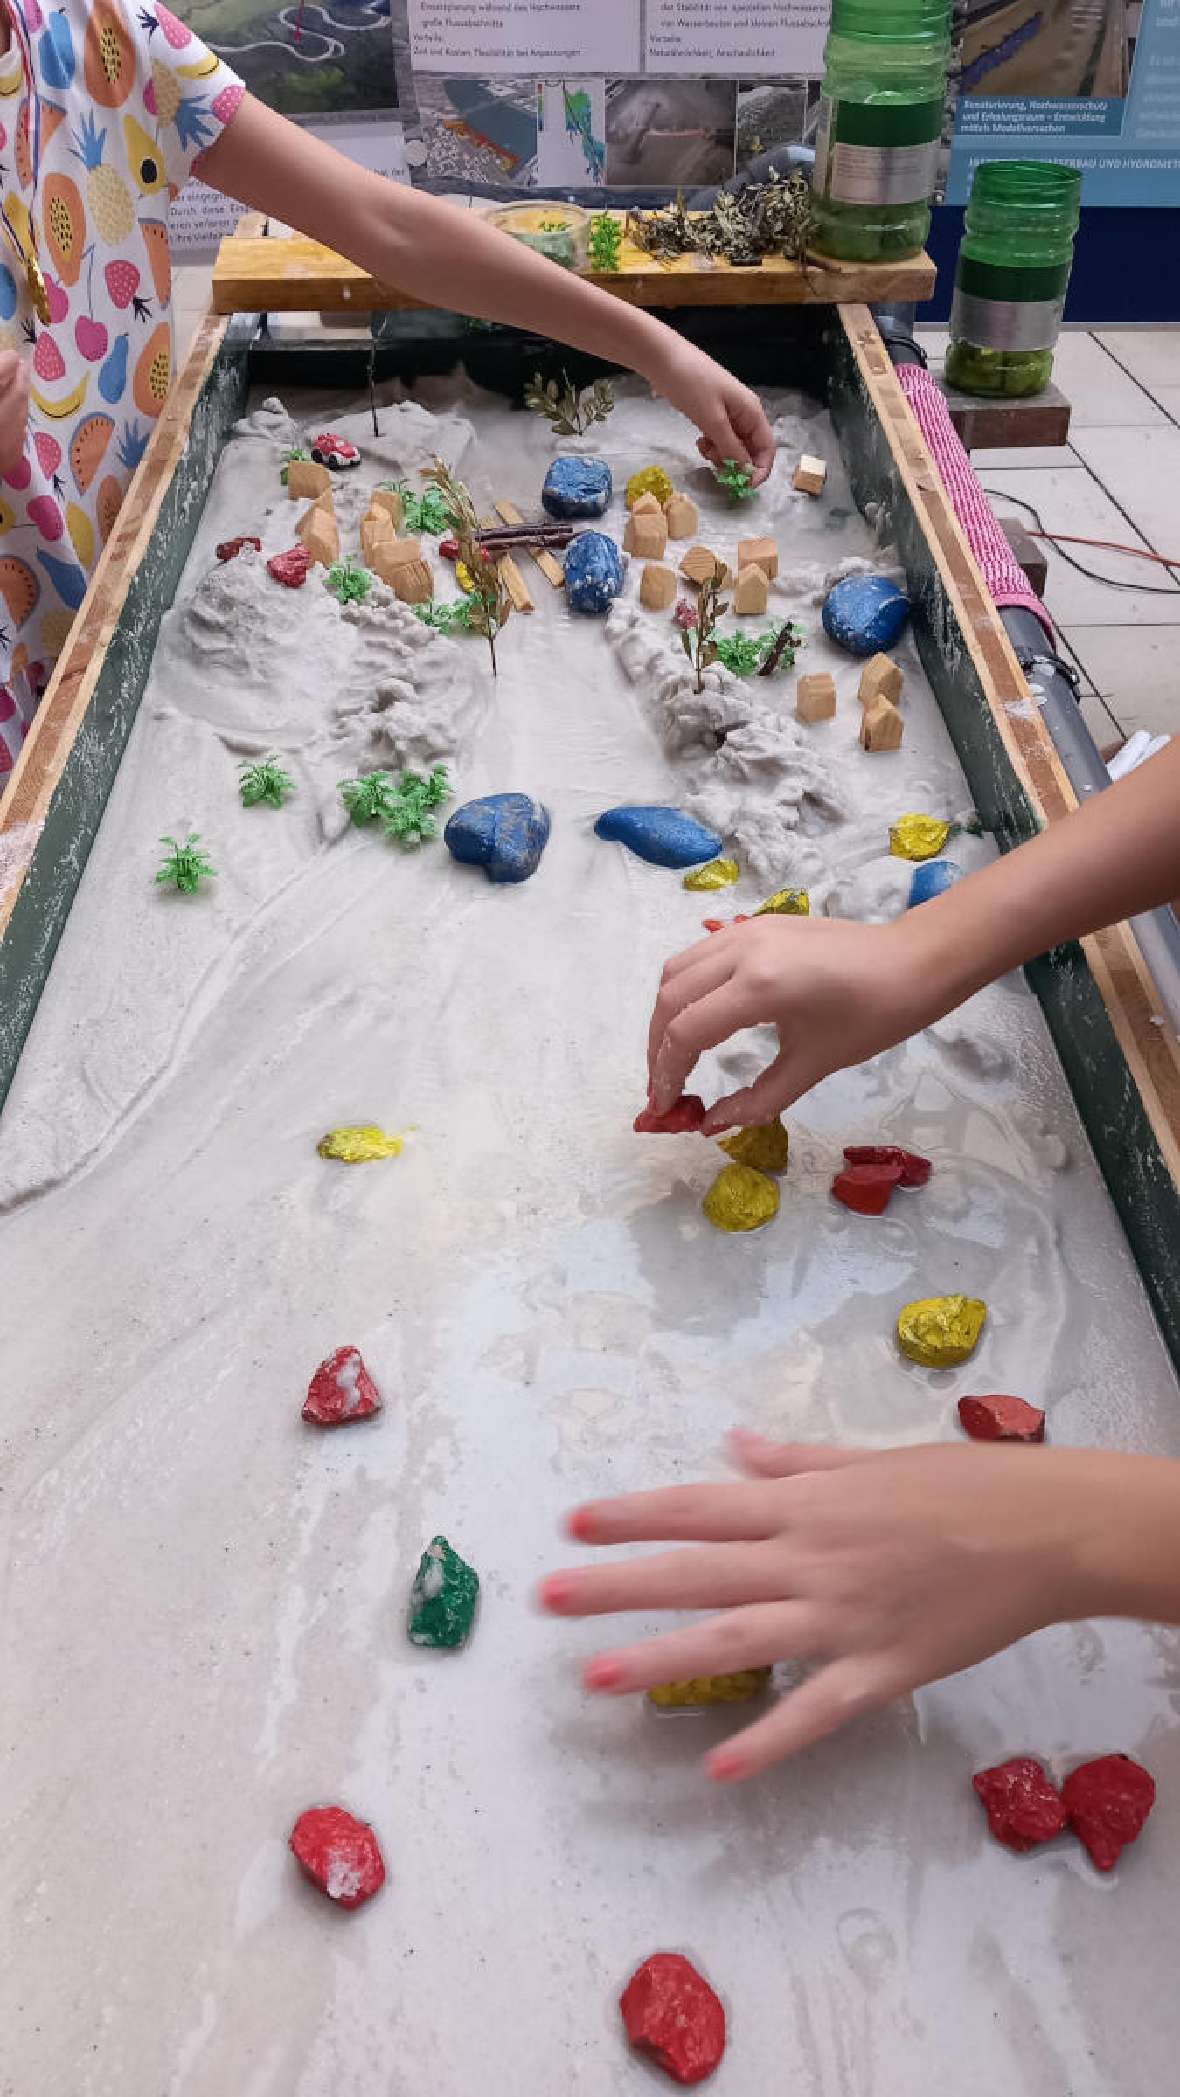 The picture shows the approximately 1 metre wide channel of our model river filled with fine sand. Children stand to the left and right of the model river and build their own river with colourful stones.